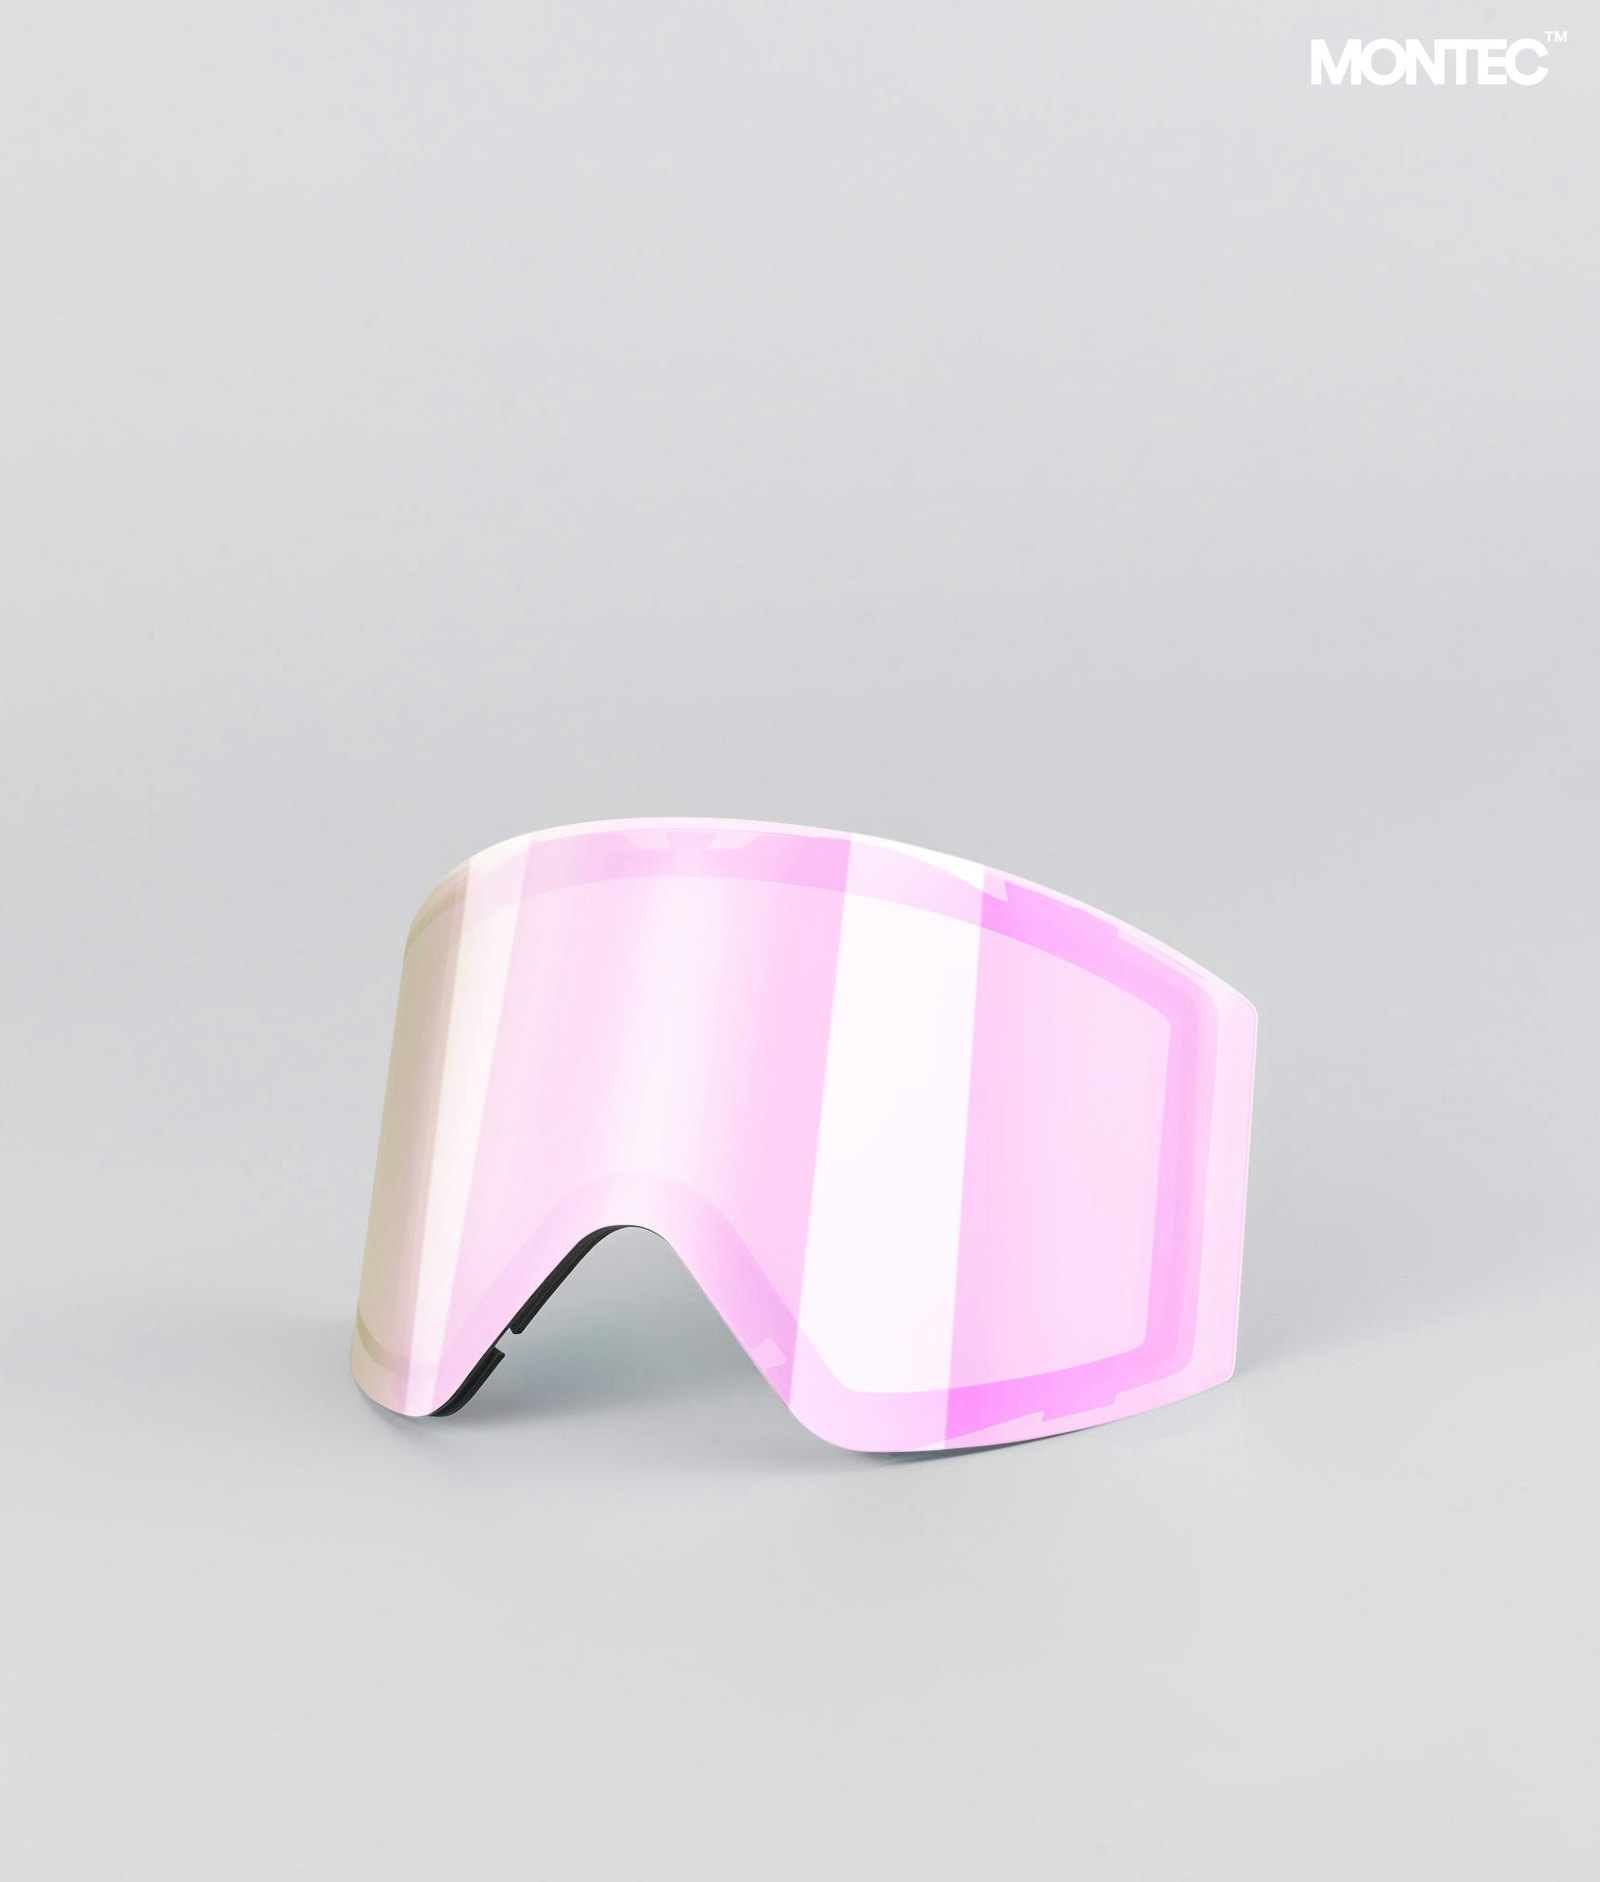 Montec Scope 2020 Goggle Lens Large Extra Glas Snow Pink Sapphire